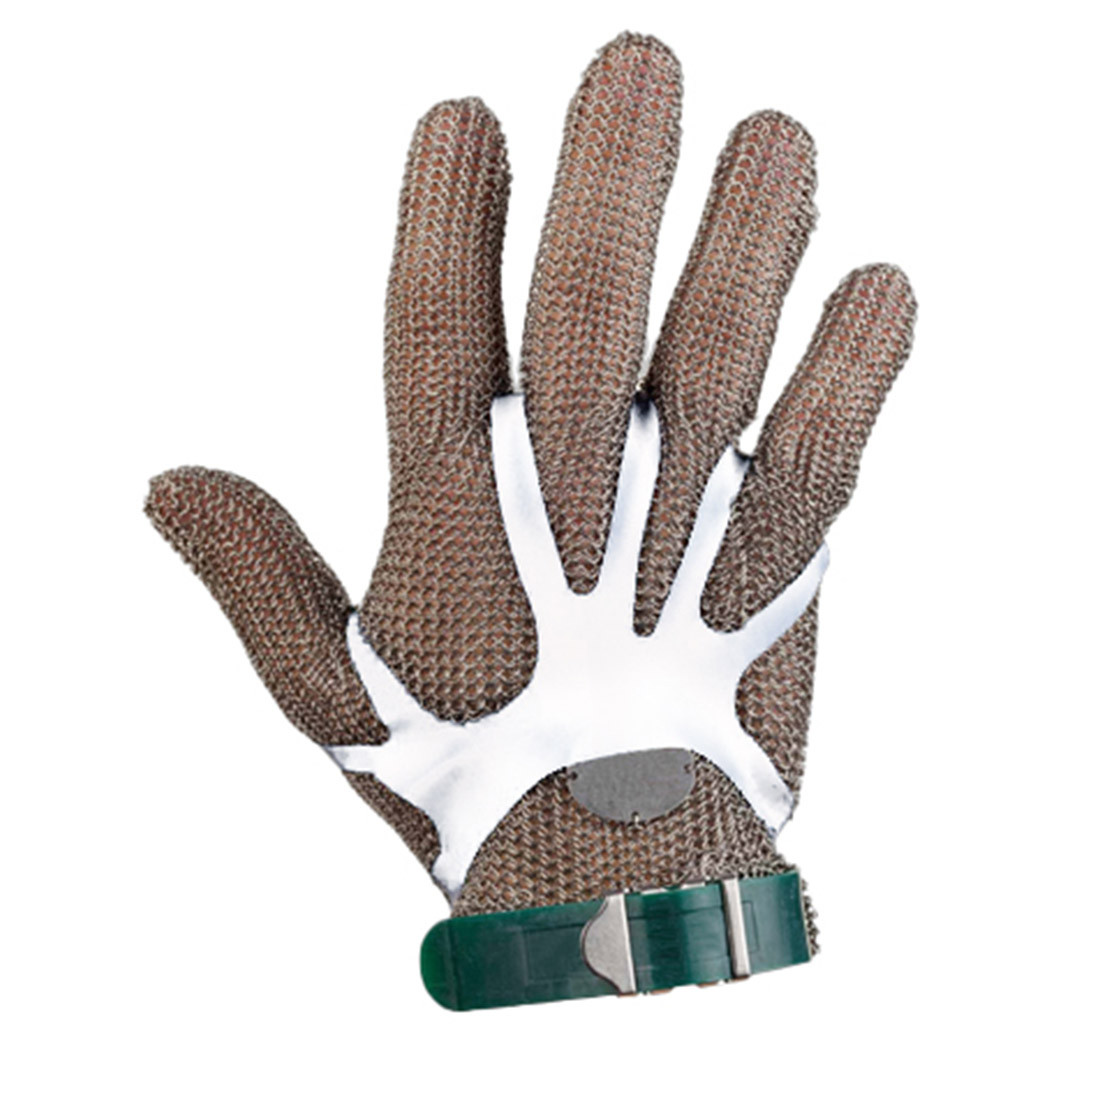 Glove Tensioner - Personal protection